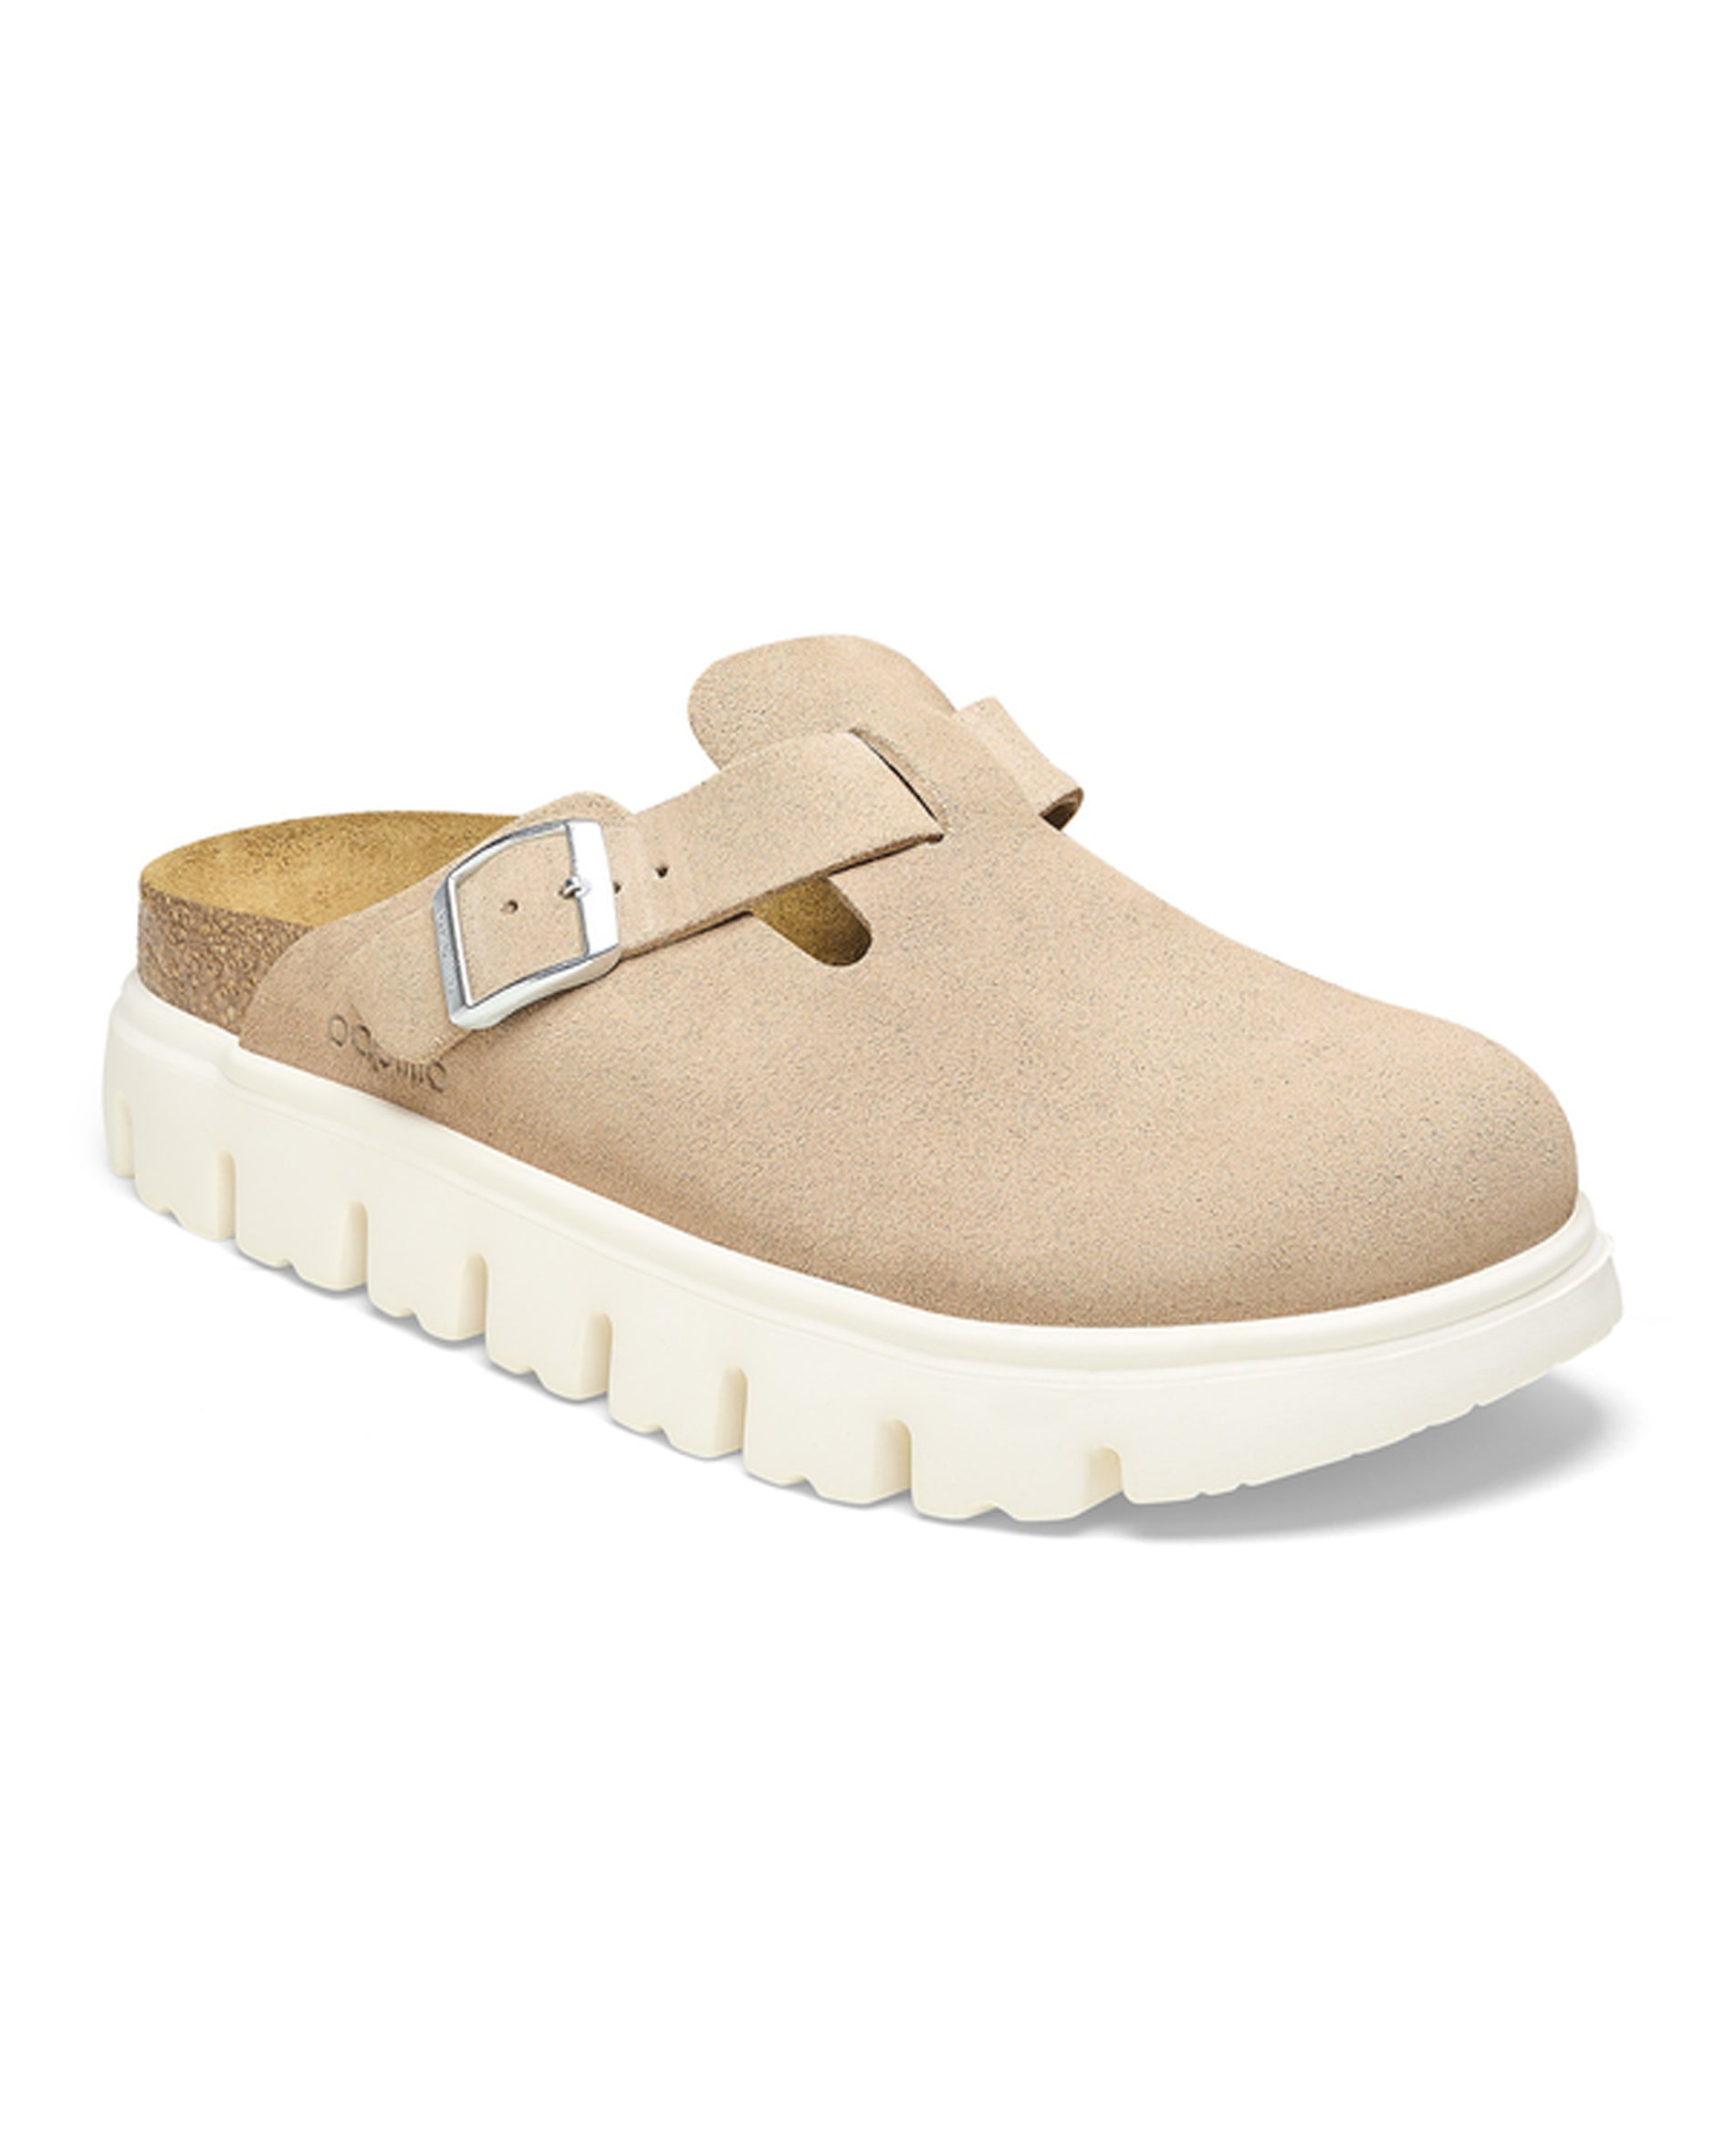 Boston Chunky Warm Sand Suede Leather Clogs